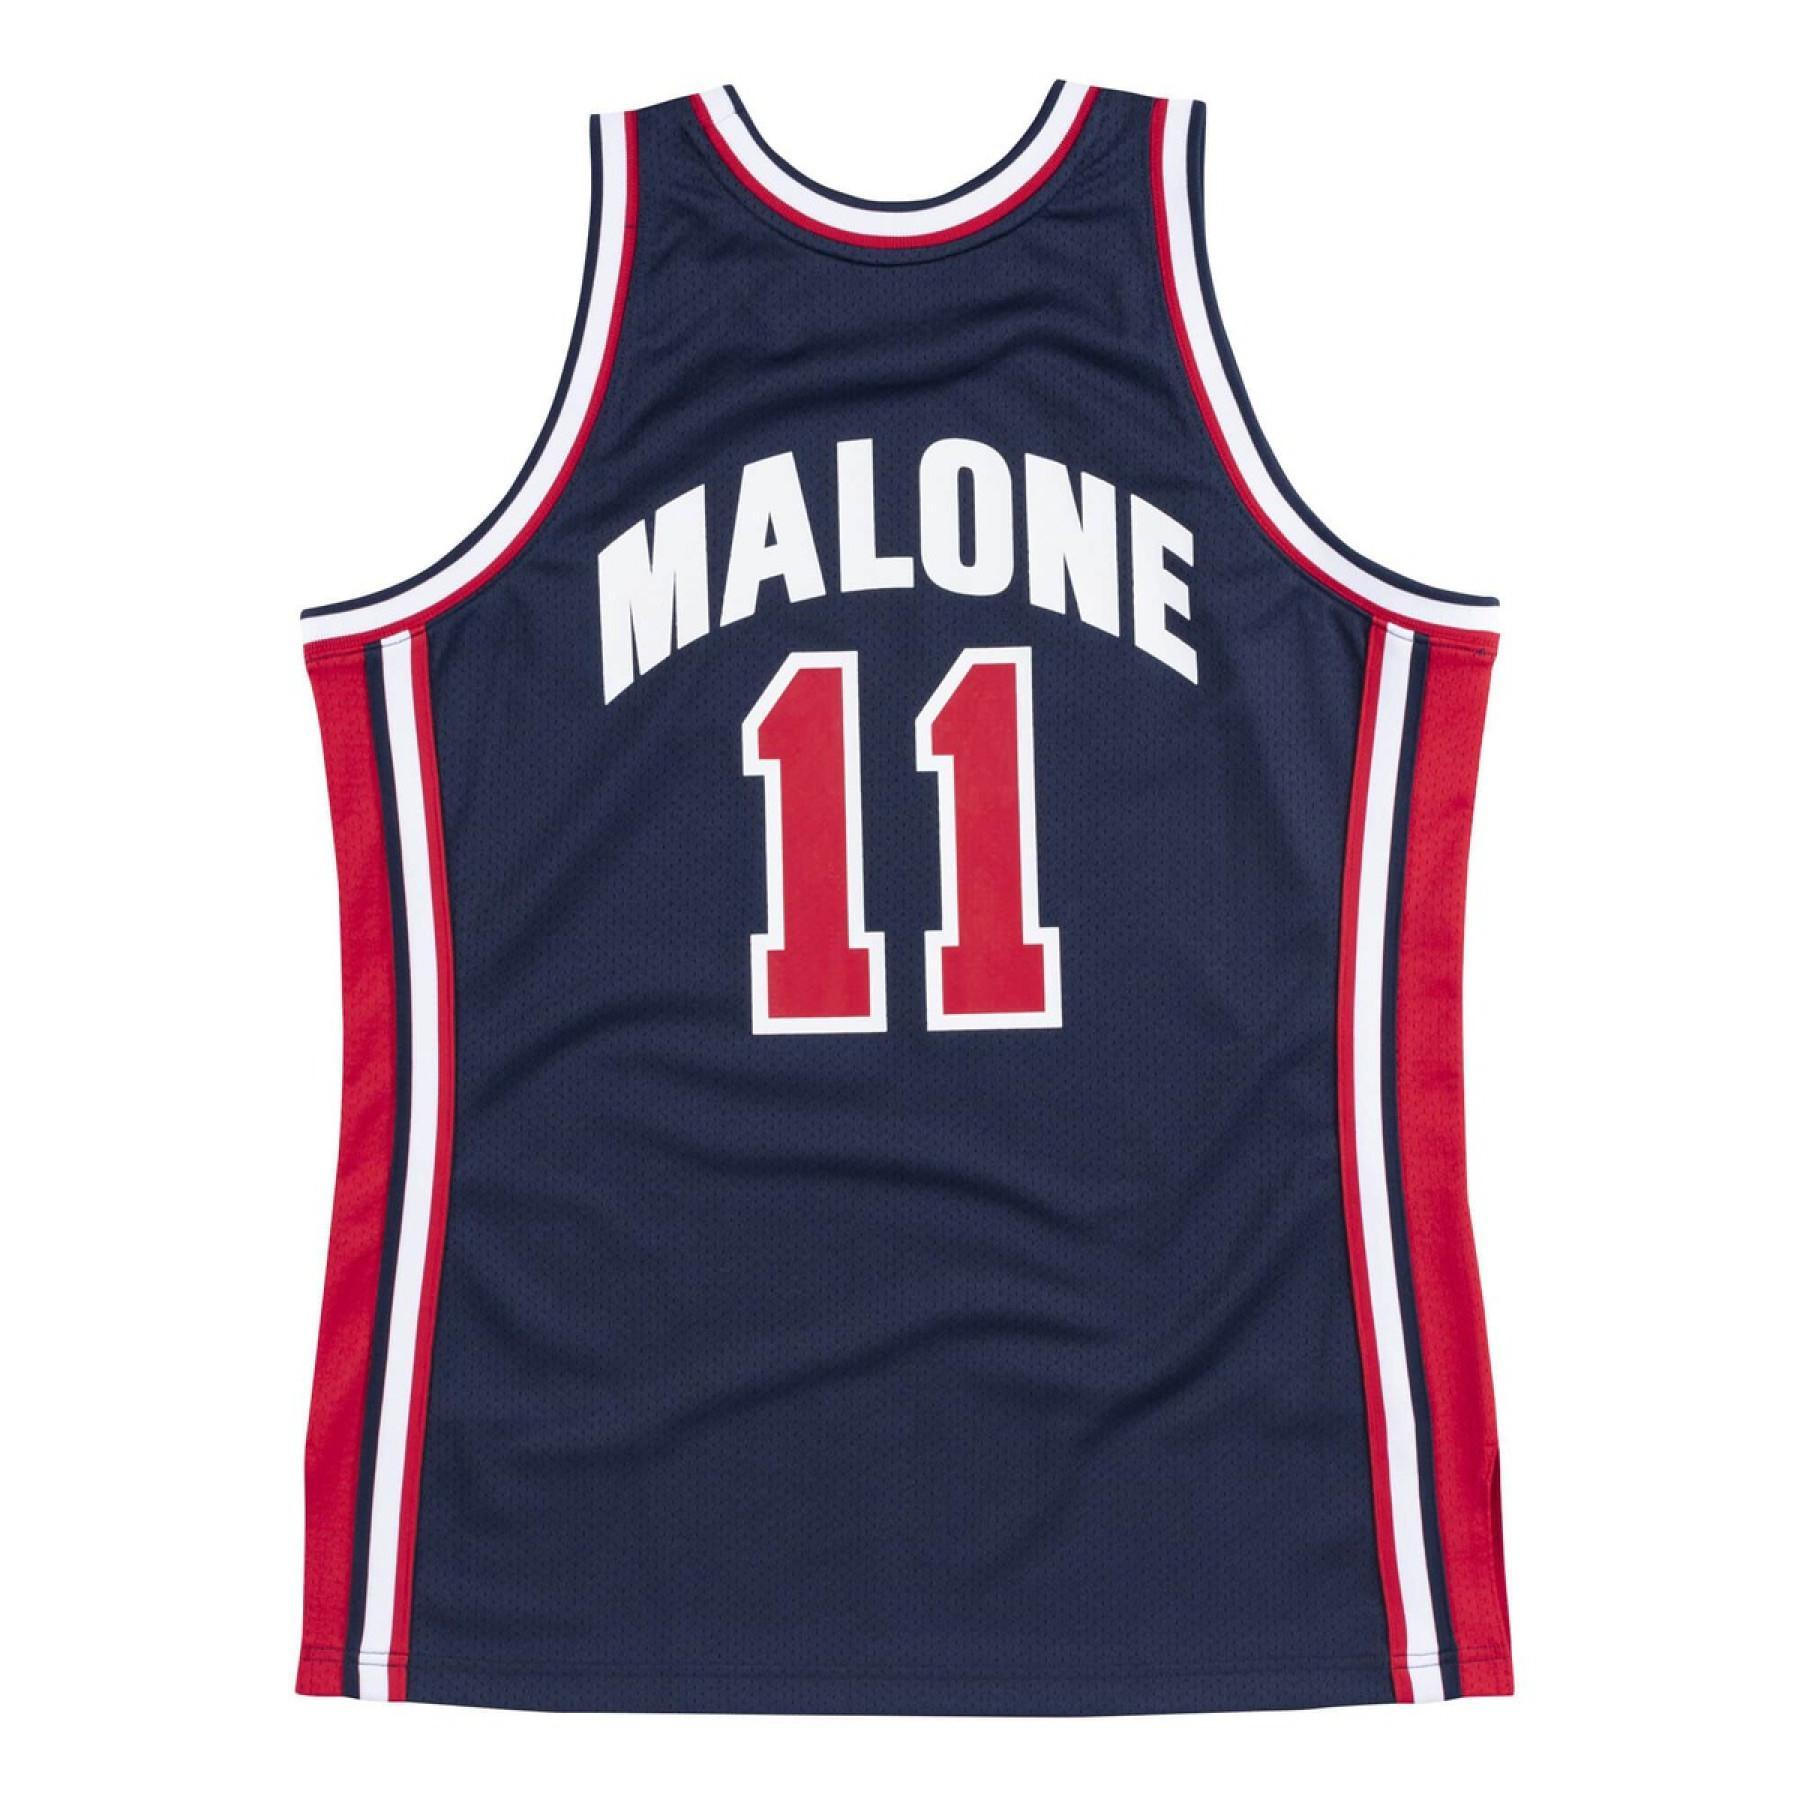 Maillot authentique Team USA nba Karl Malone